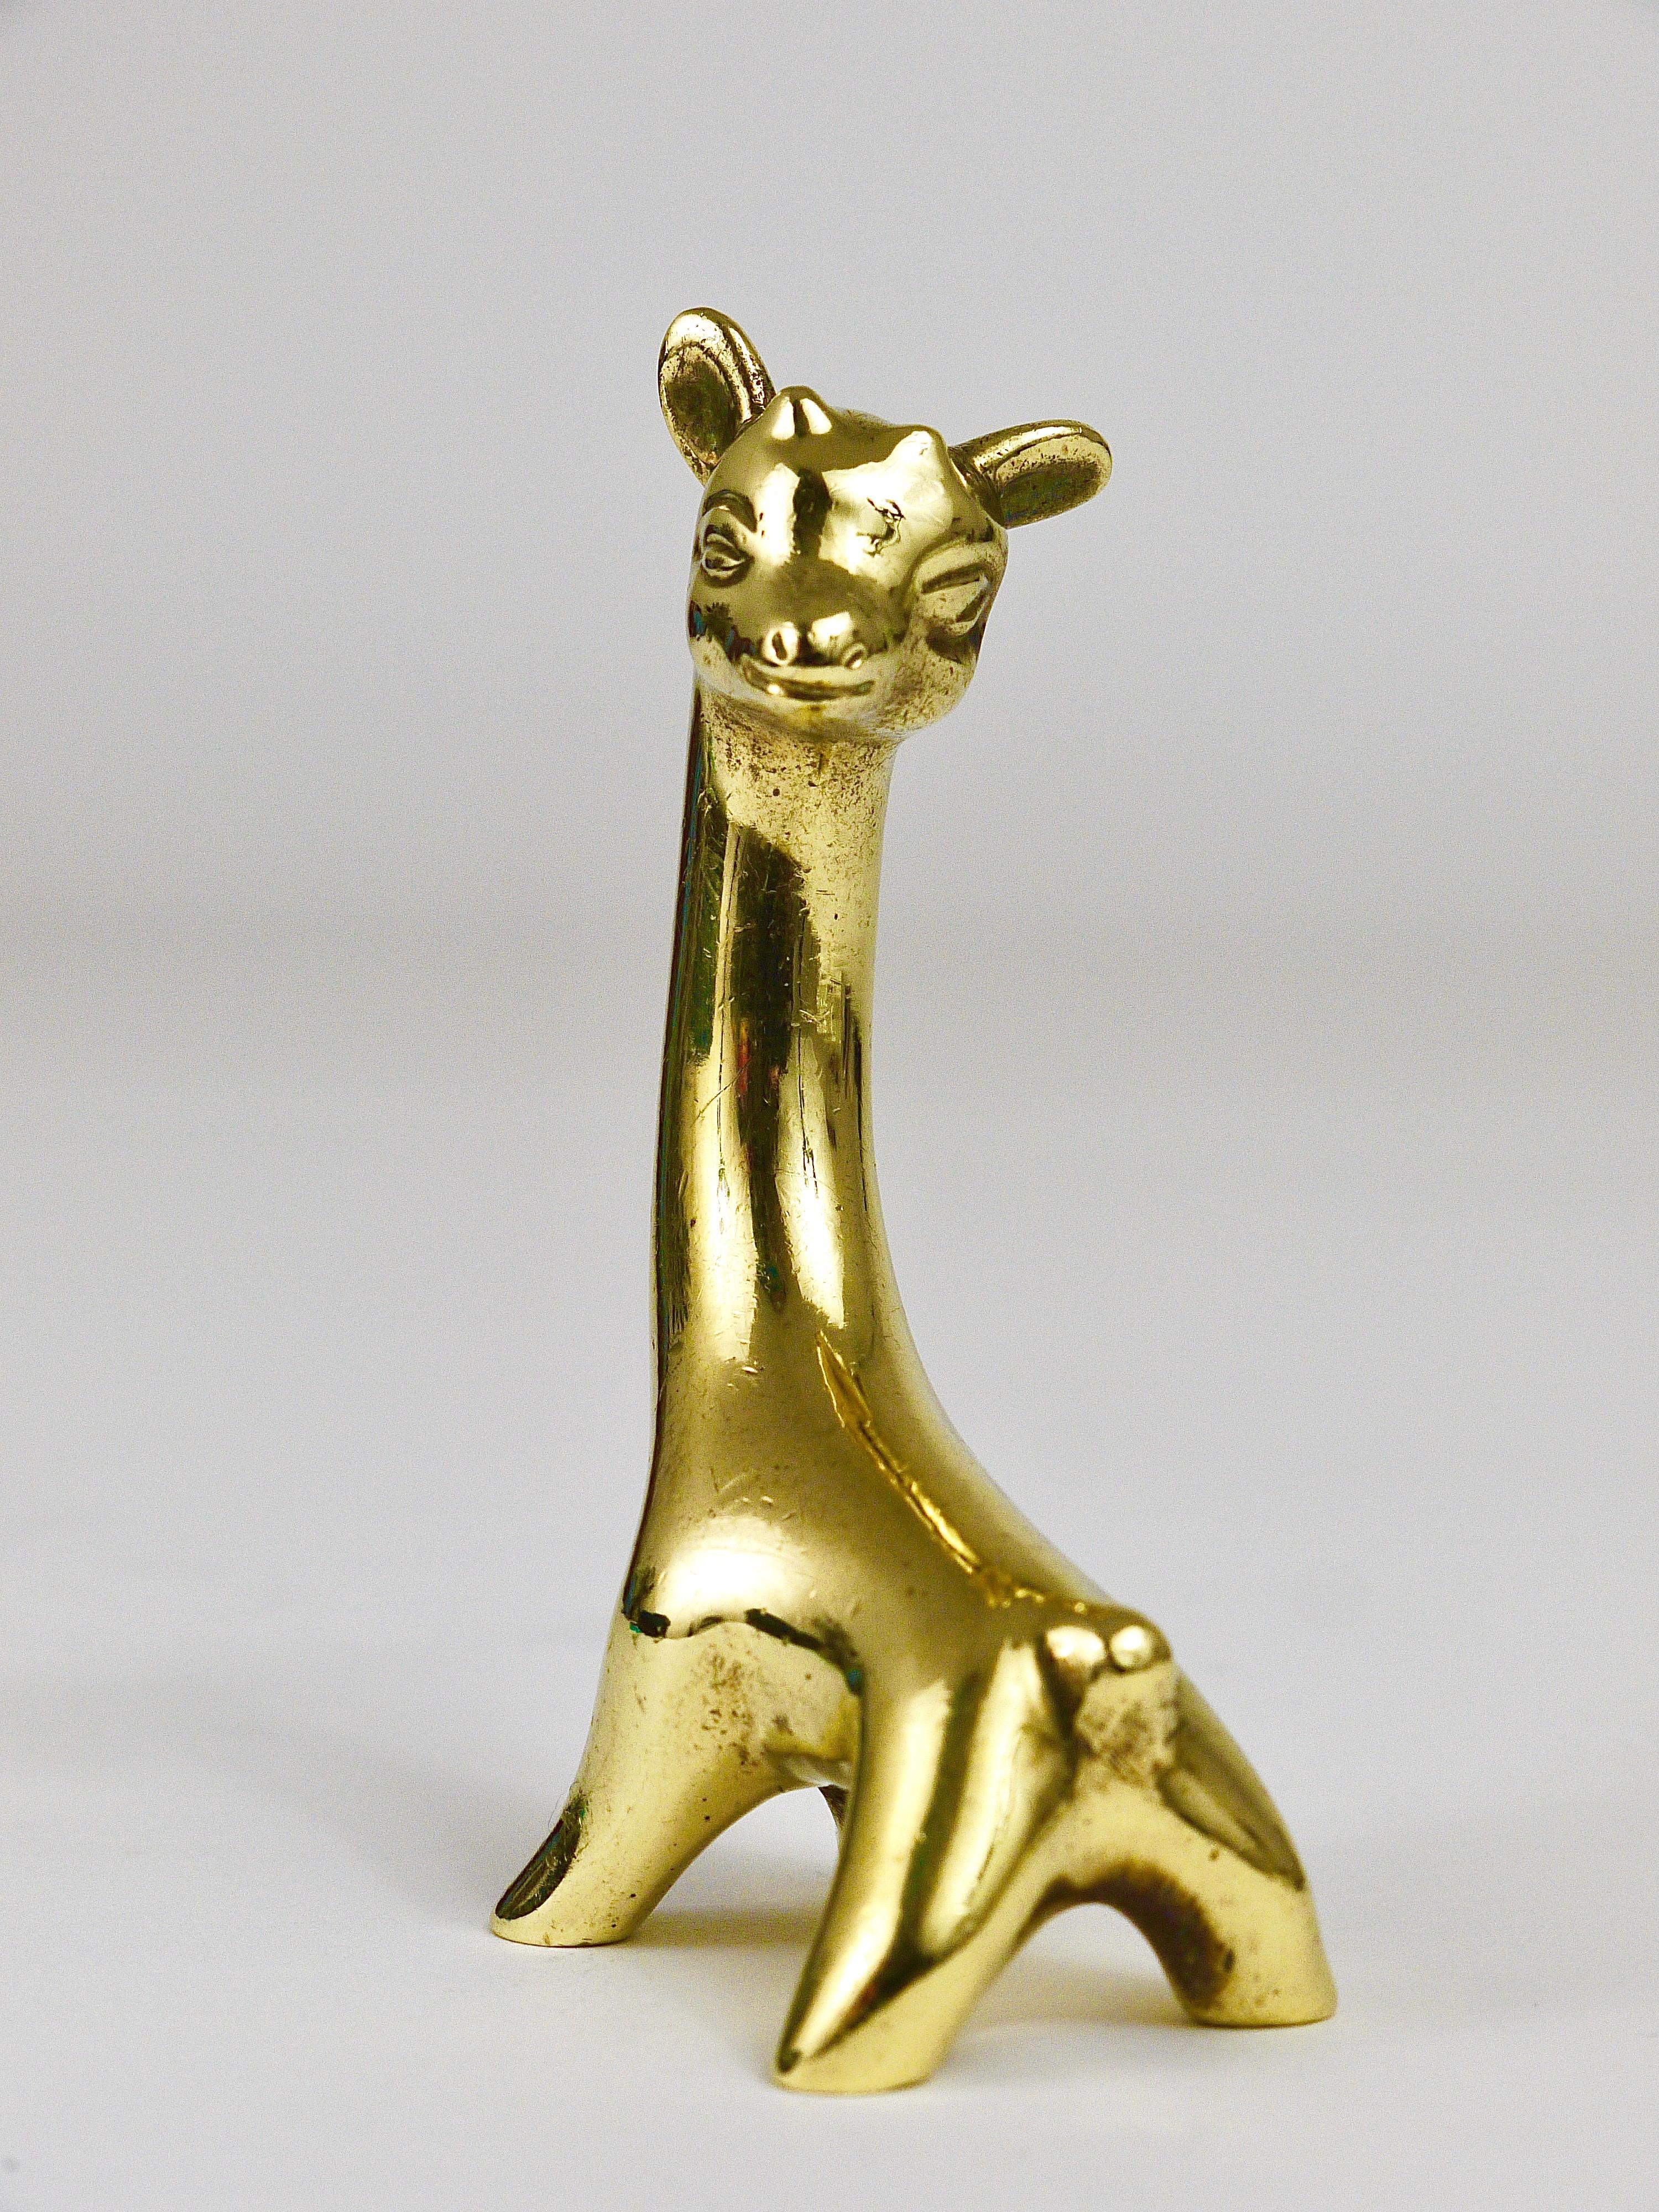 A lovely baby giraffe sculpture made of brass from the 1950s. Designed by Walter Bosse, executed by Herta Baller, Austria. In very good condition with marginal patina.